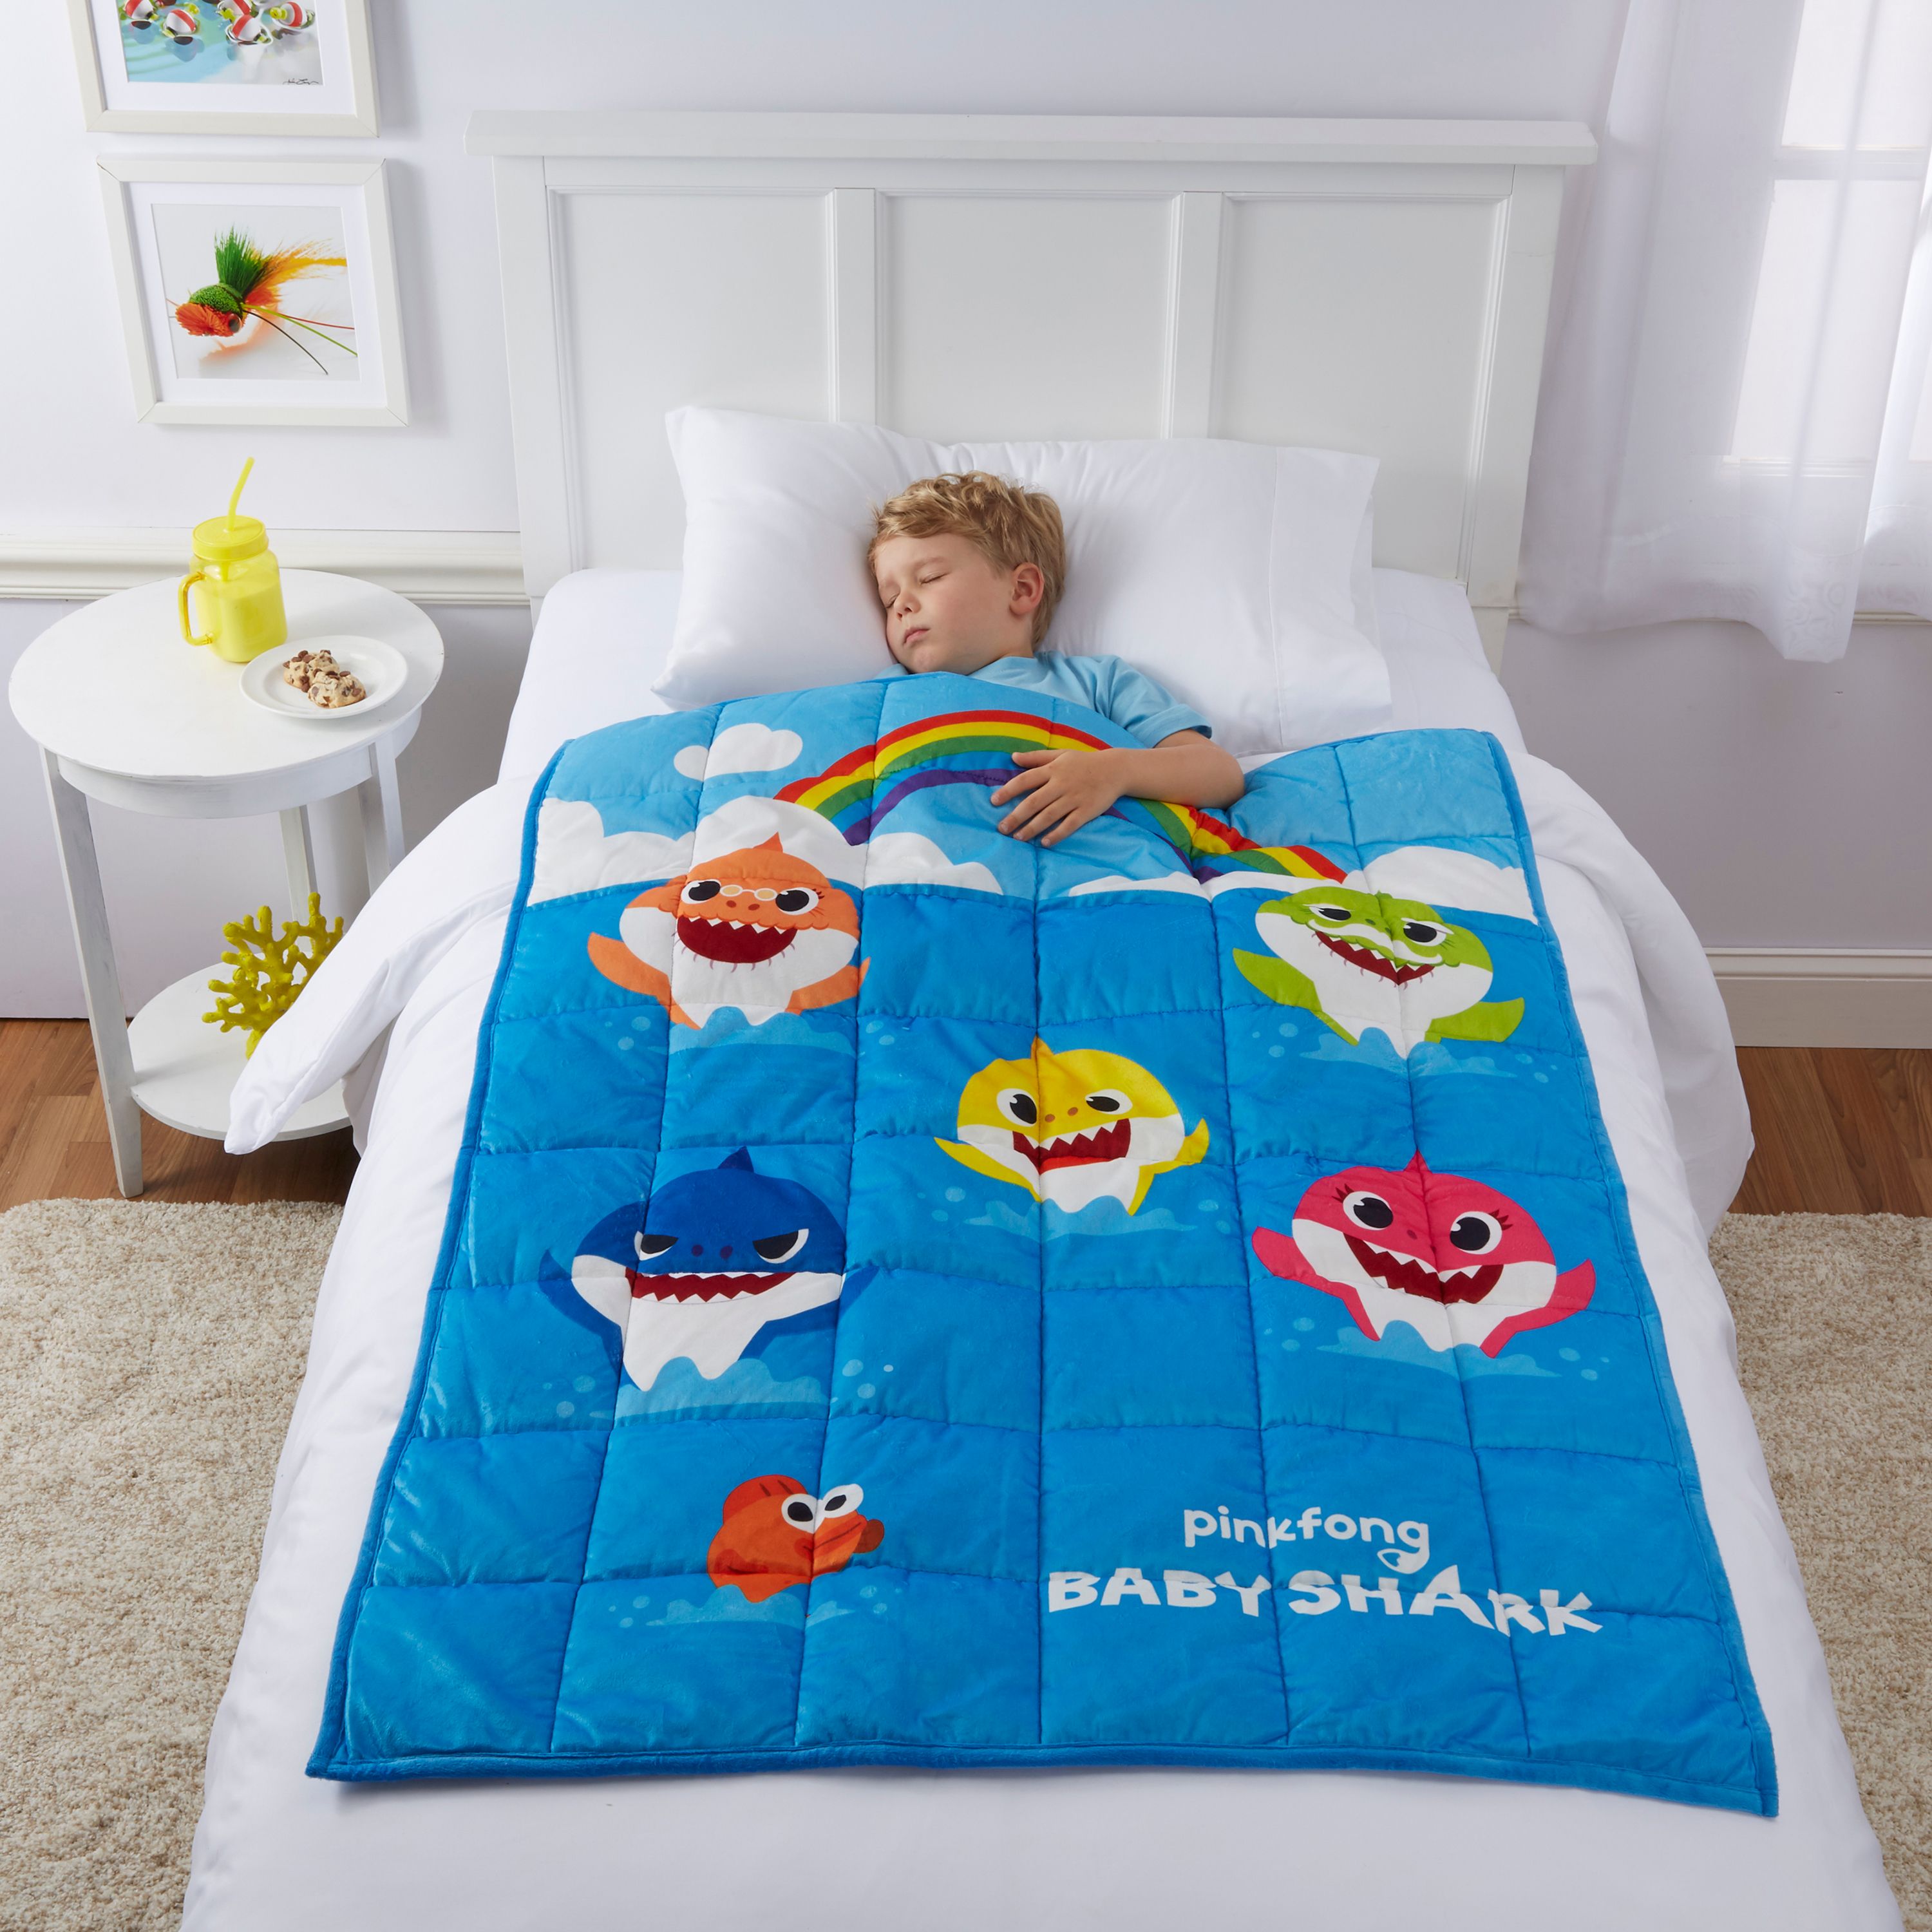 Baby Shark Kids Weighted Blanket, 4.5lb, 36 x 48, Blue, Nickelodeon - image 1 of 7